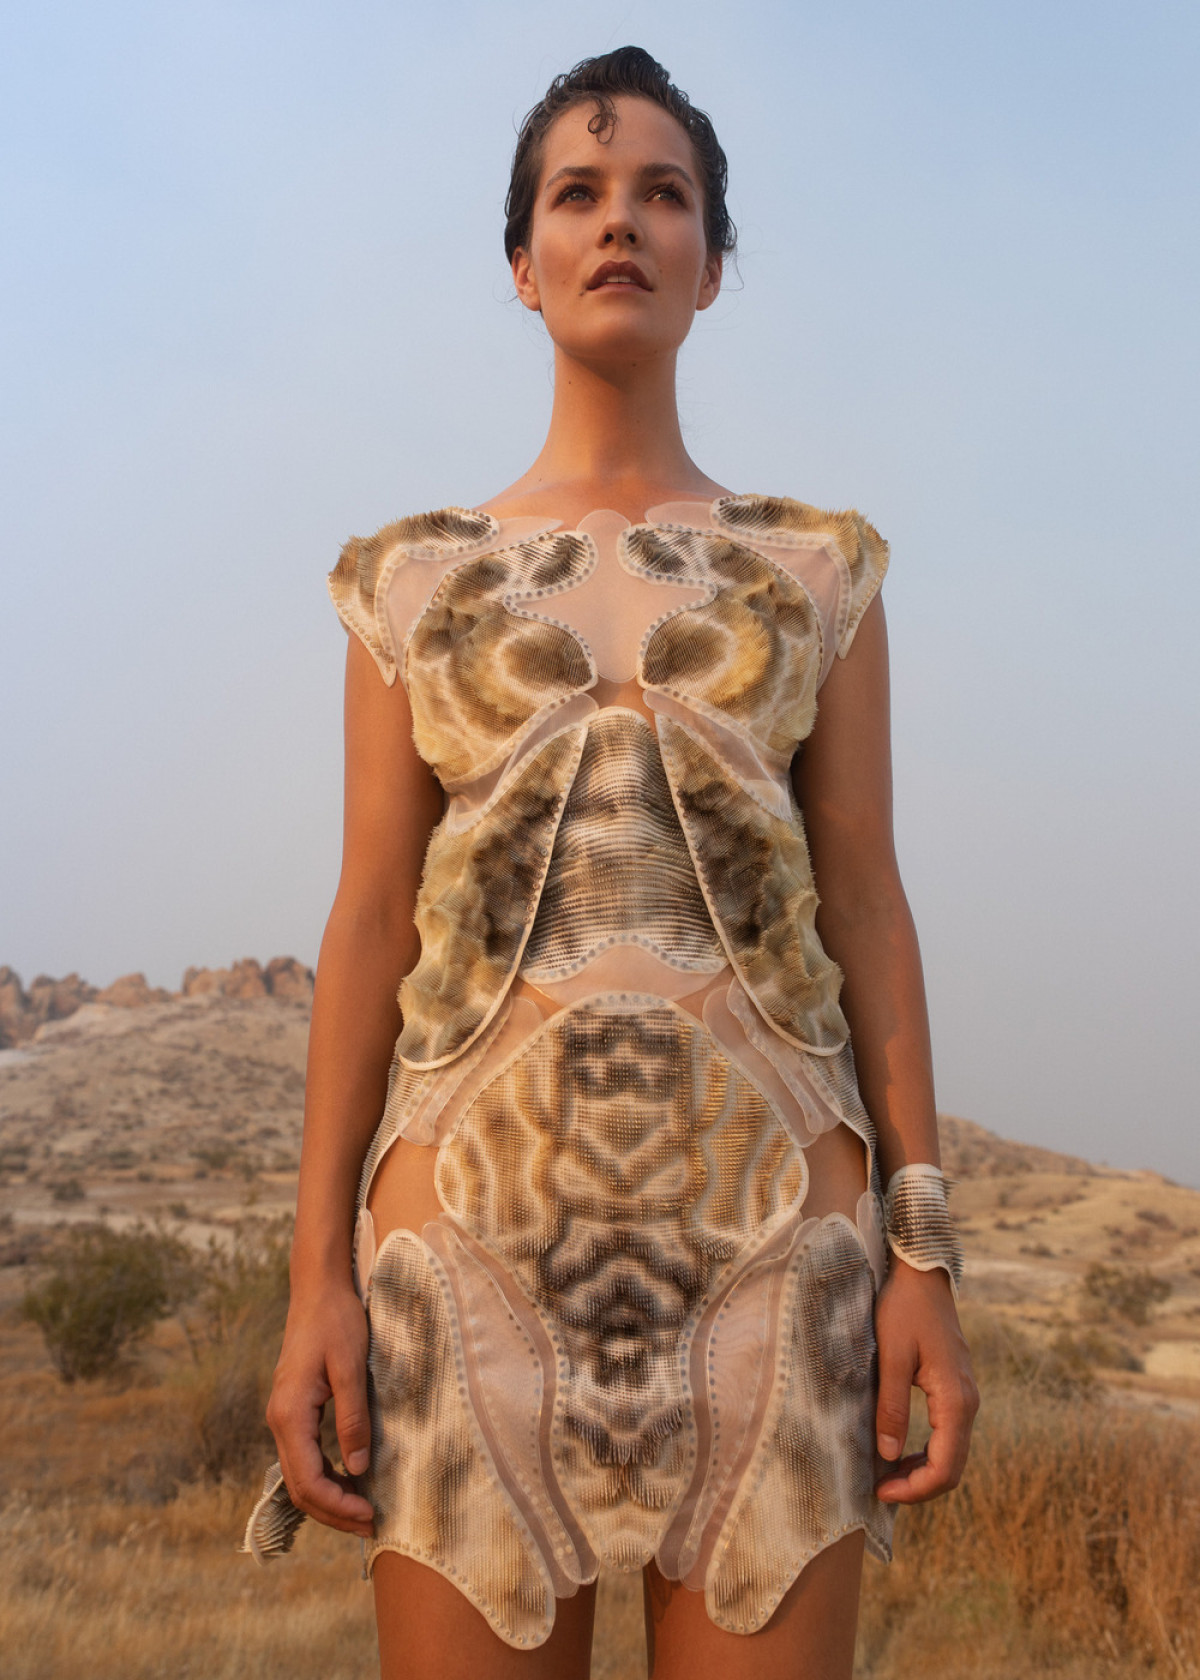 Julia Koerner ARID Dress (2020)  Dress (Multicoloured 3D printed components, merging organic and synthetic processes)  Photo credit: Ger Ger